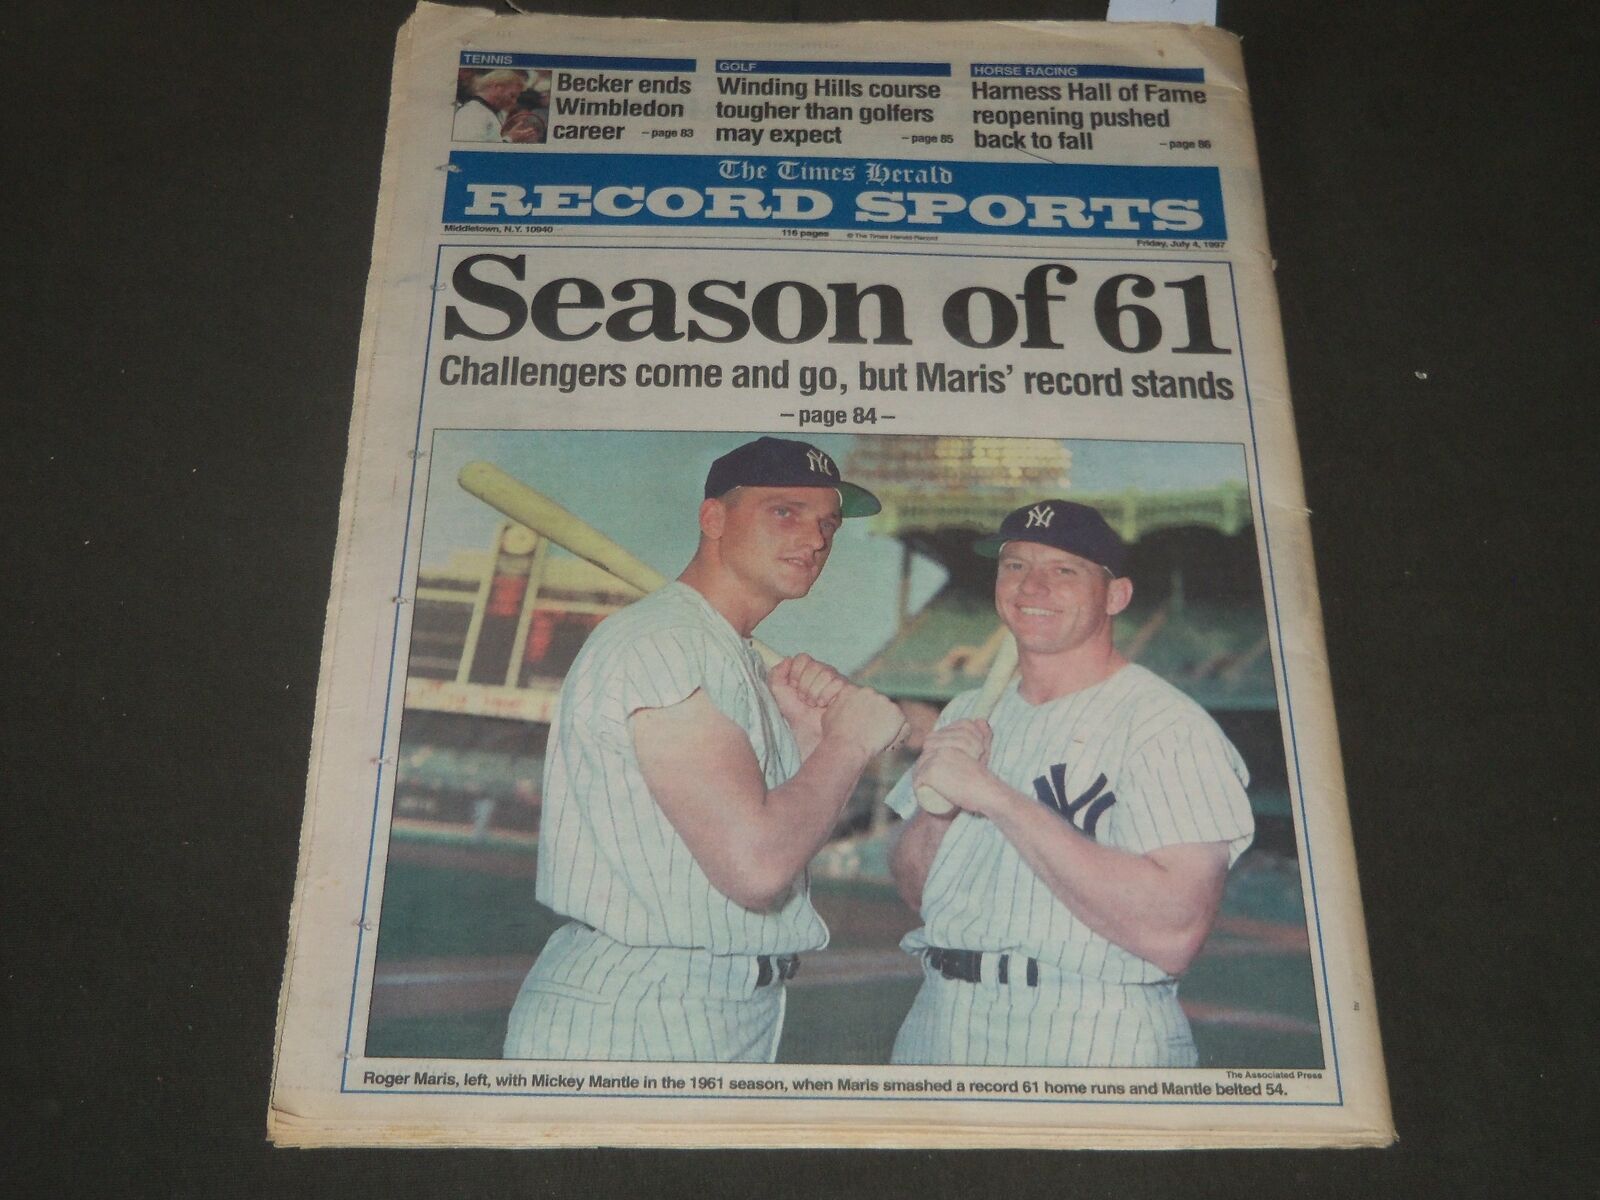 1997 JULY 4 TIMES HERALD RECORD NEWSPAPER - SEASON OF 61 - MANTLE - NP 2531